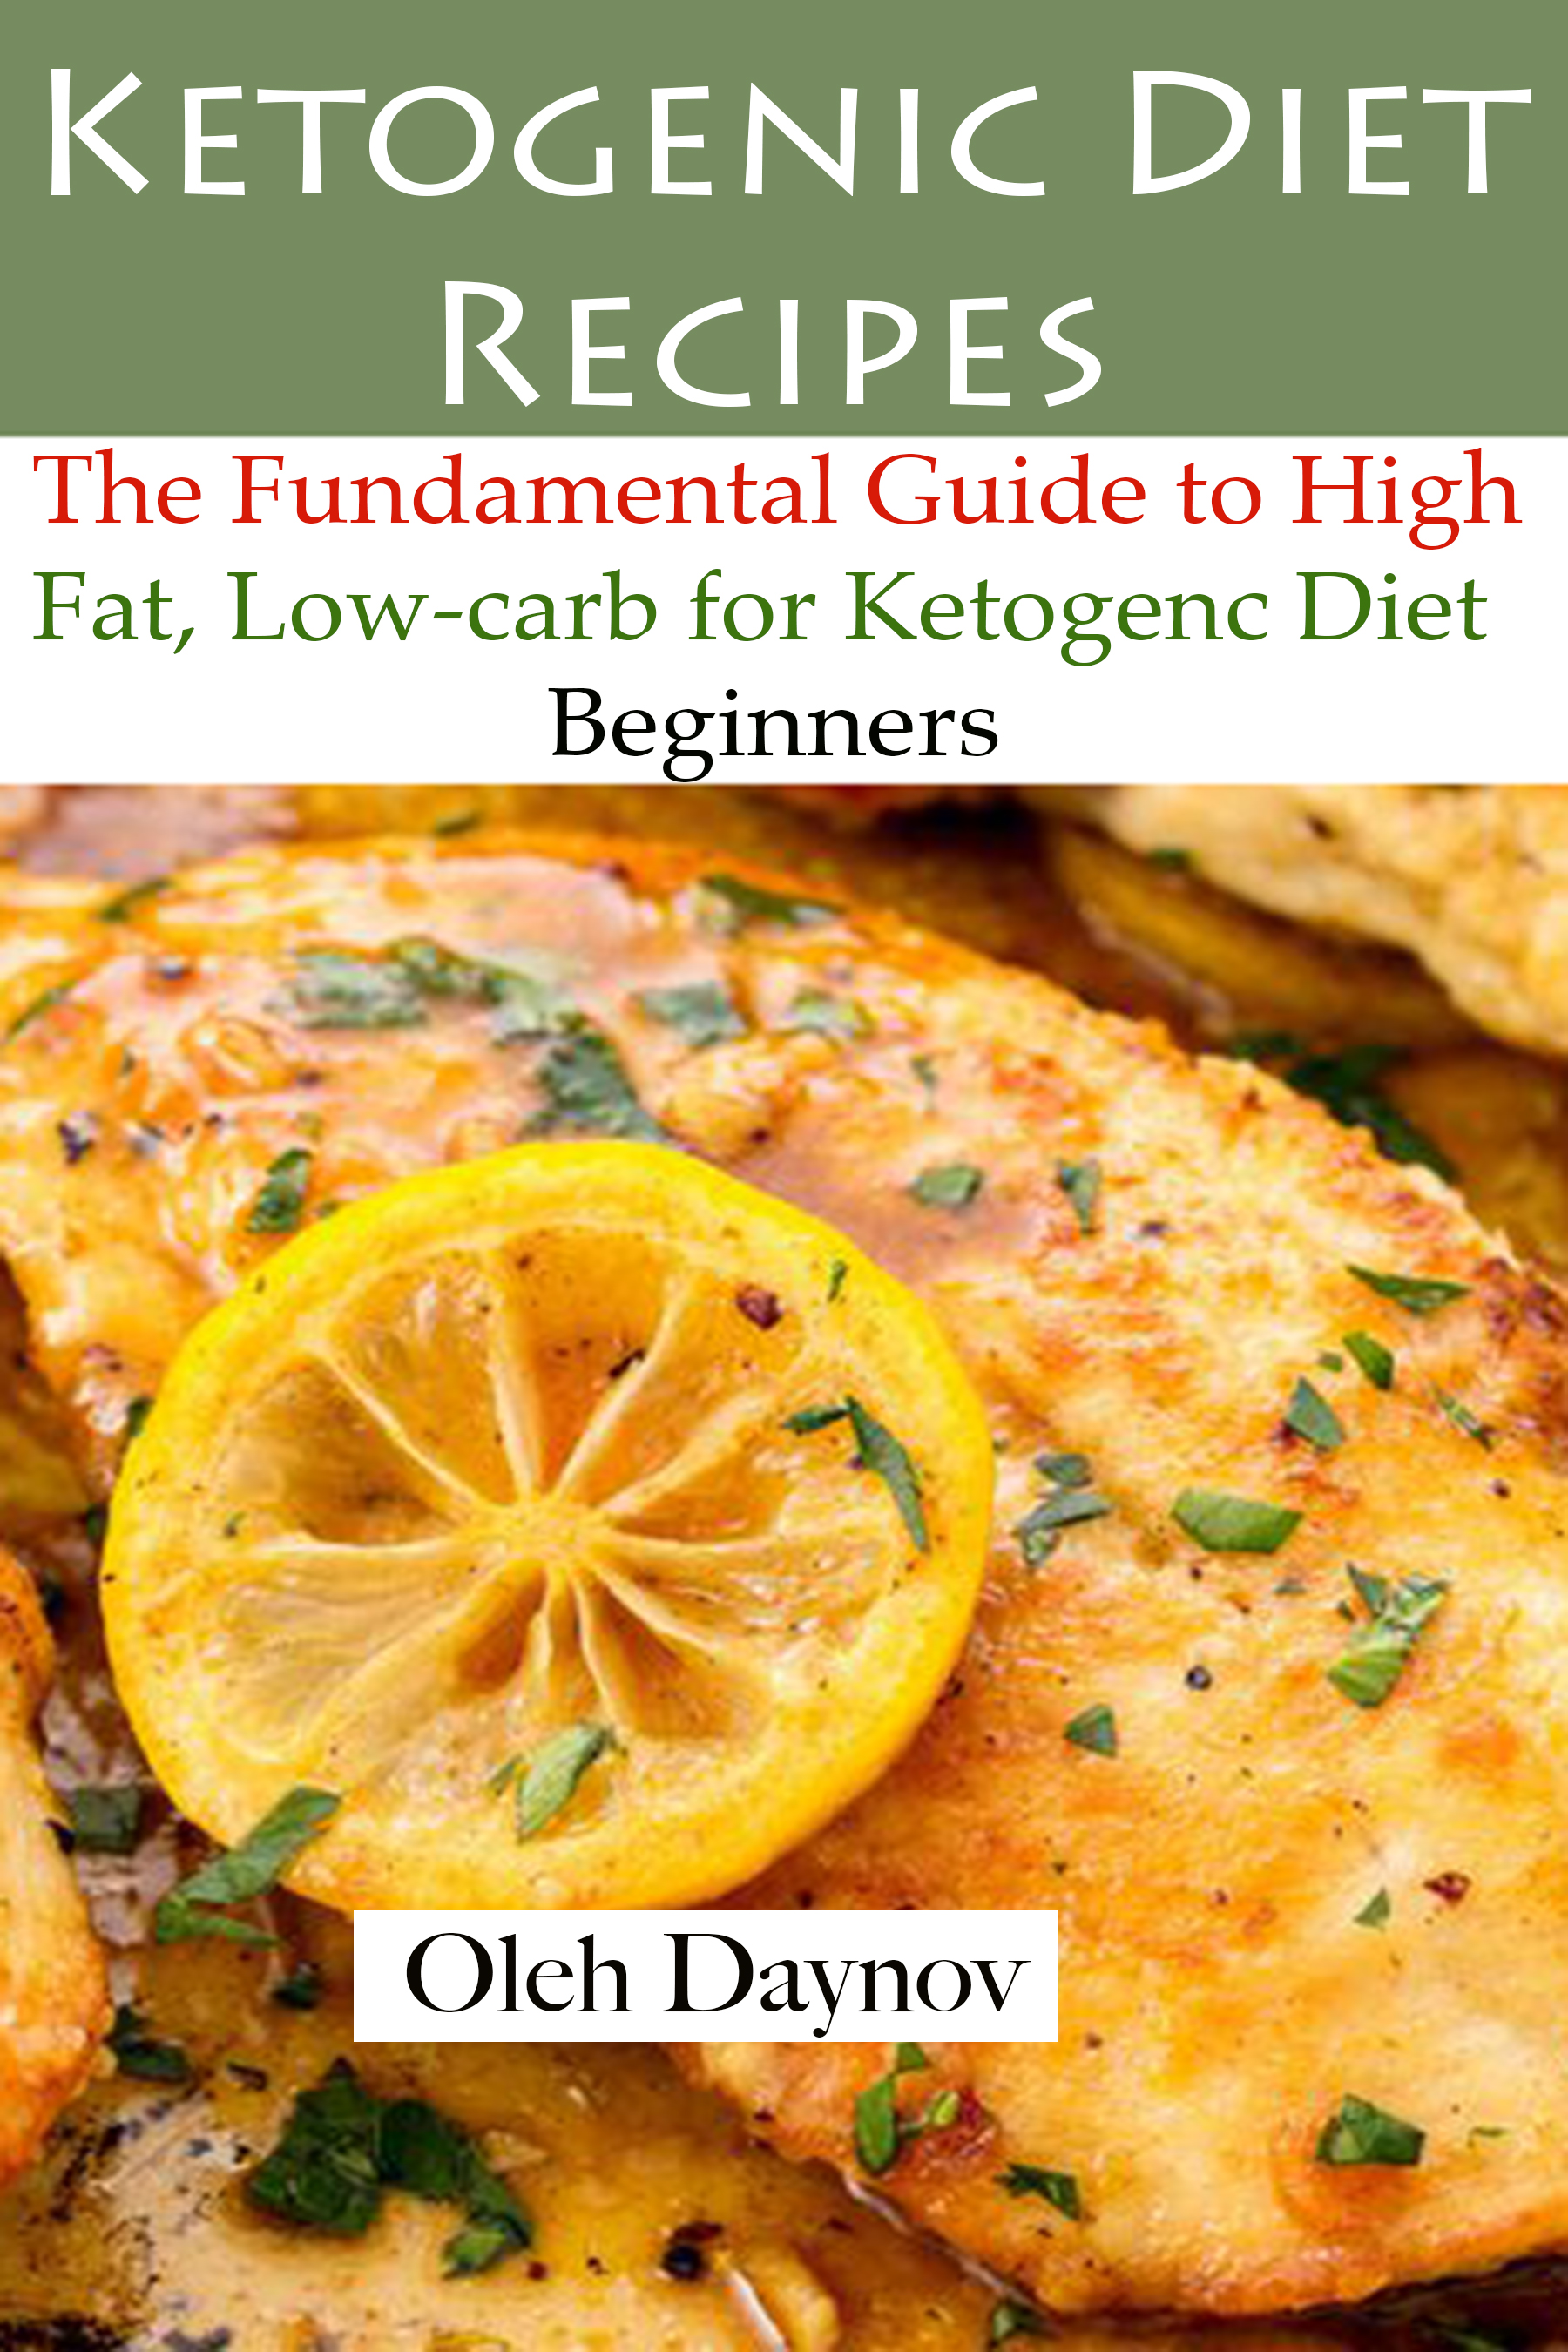 FREE: Ketogenic Diet for Beginner 97 Recipes: Your Guide to High Fat, Low-Carb for Ketogenic Diet Beginners by Oleh Daynov